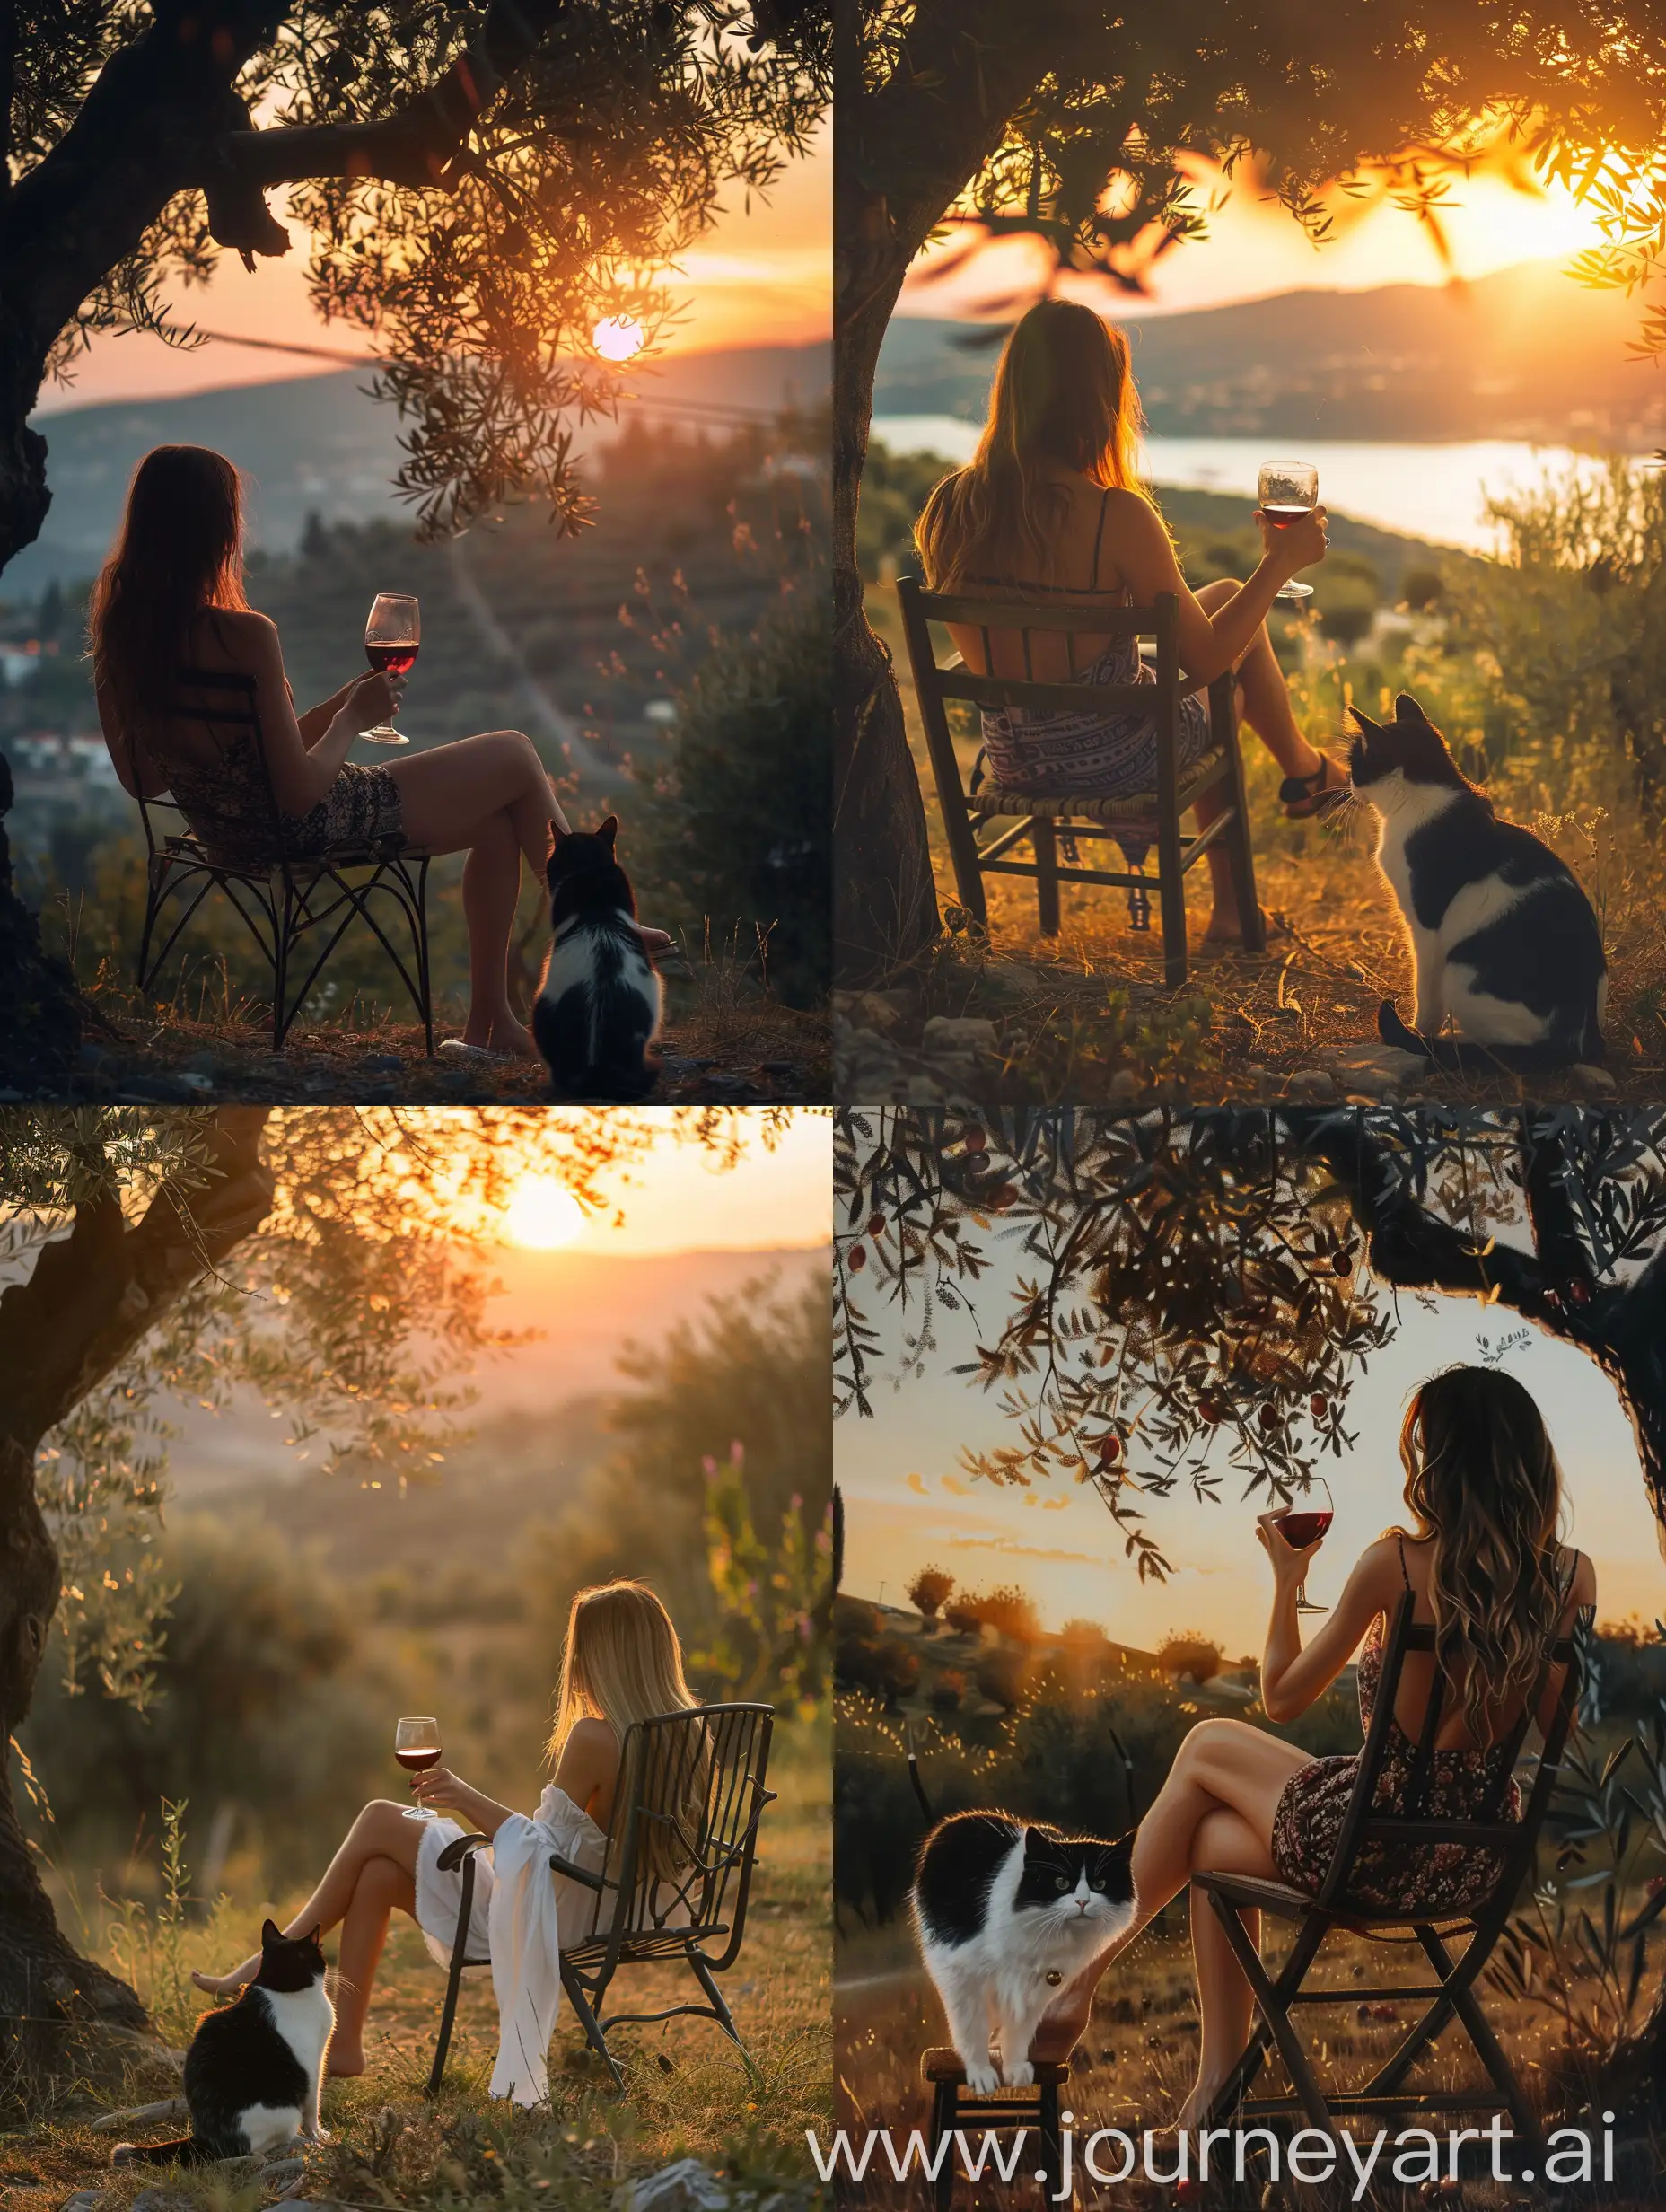 Serene-Woman-Enjoying-Sunset-with-Cat-and-Wine-Under-Olive-Tree